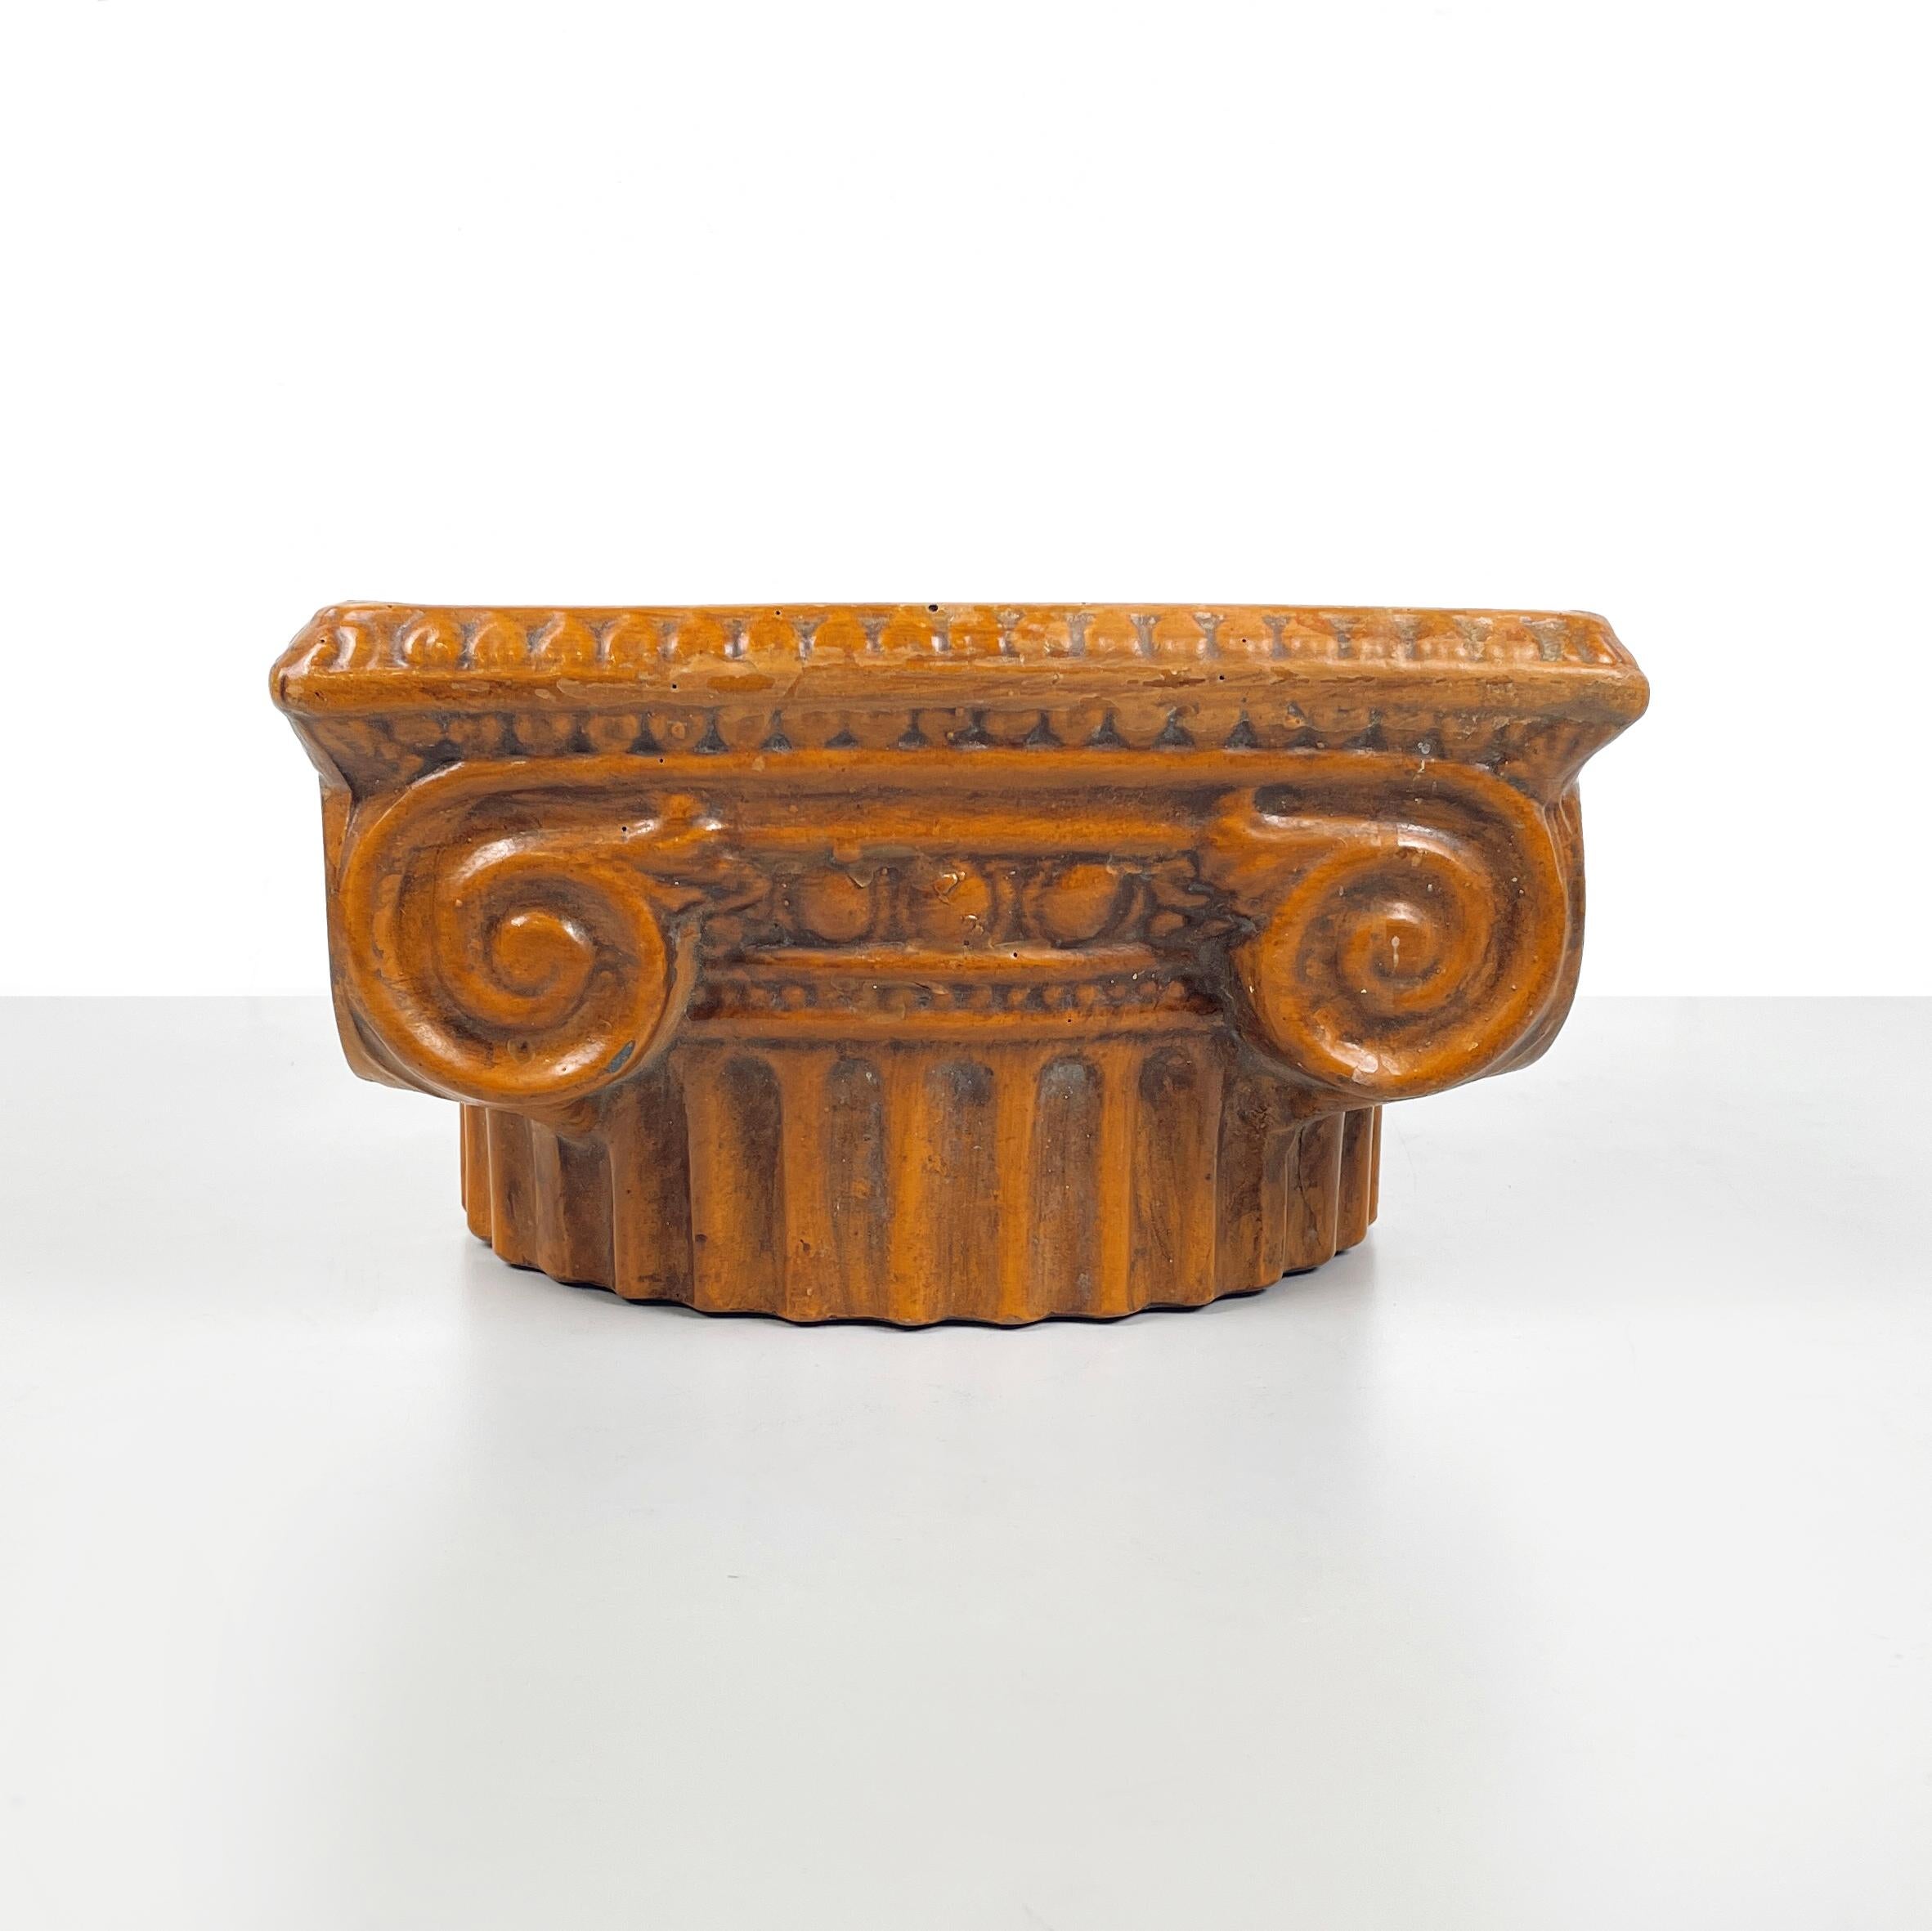 Italian modern Ionic capital centerpiece bowl in brown ceramic, 1980s
Vintage and elegant round base centerpiece in brown painted ceramic. The bowl has the shape of an Ionic capital.
It came from 1980 approx.
Good condition, it shows light signs of